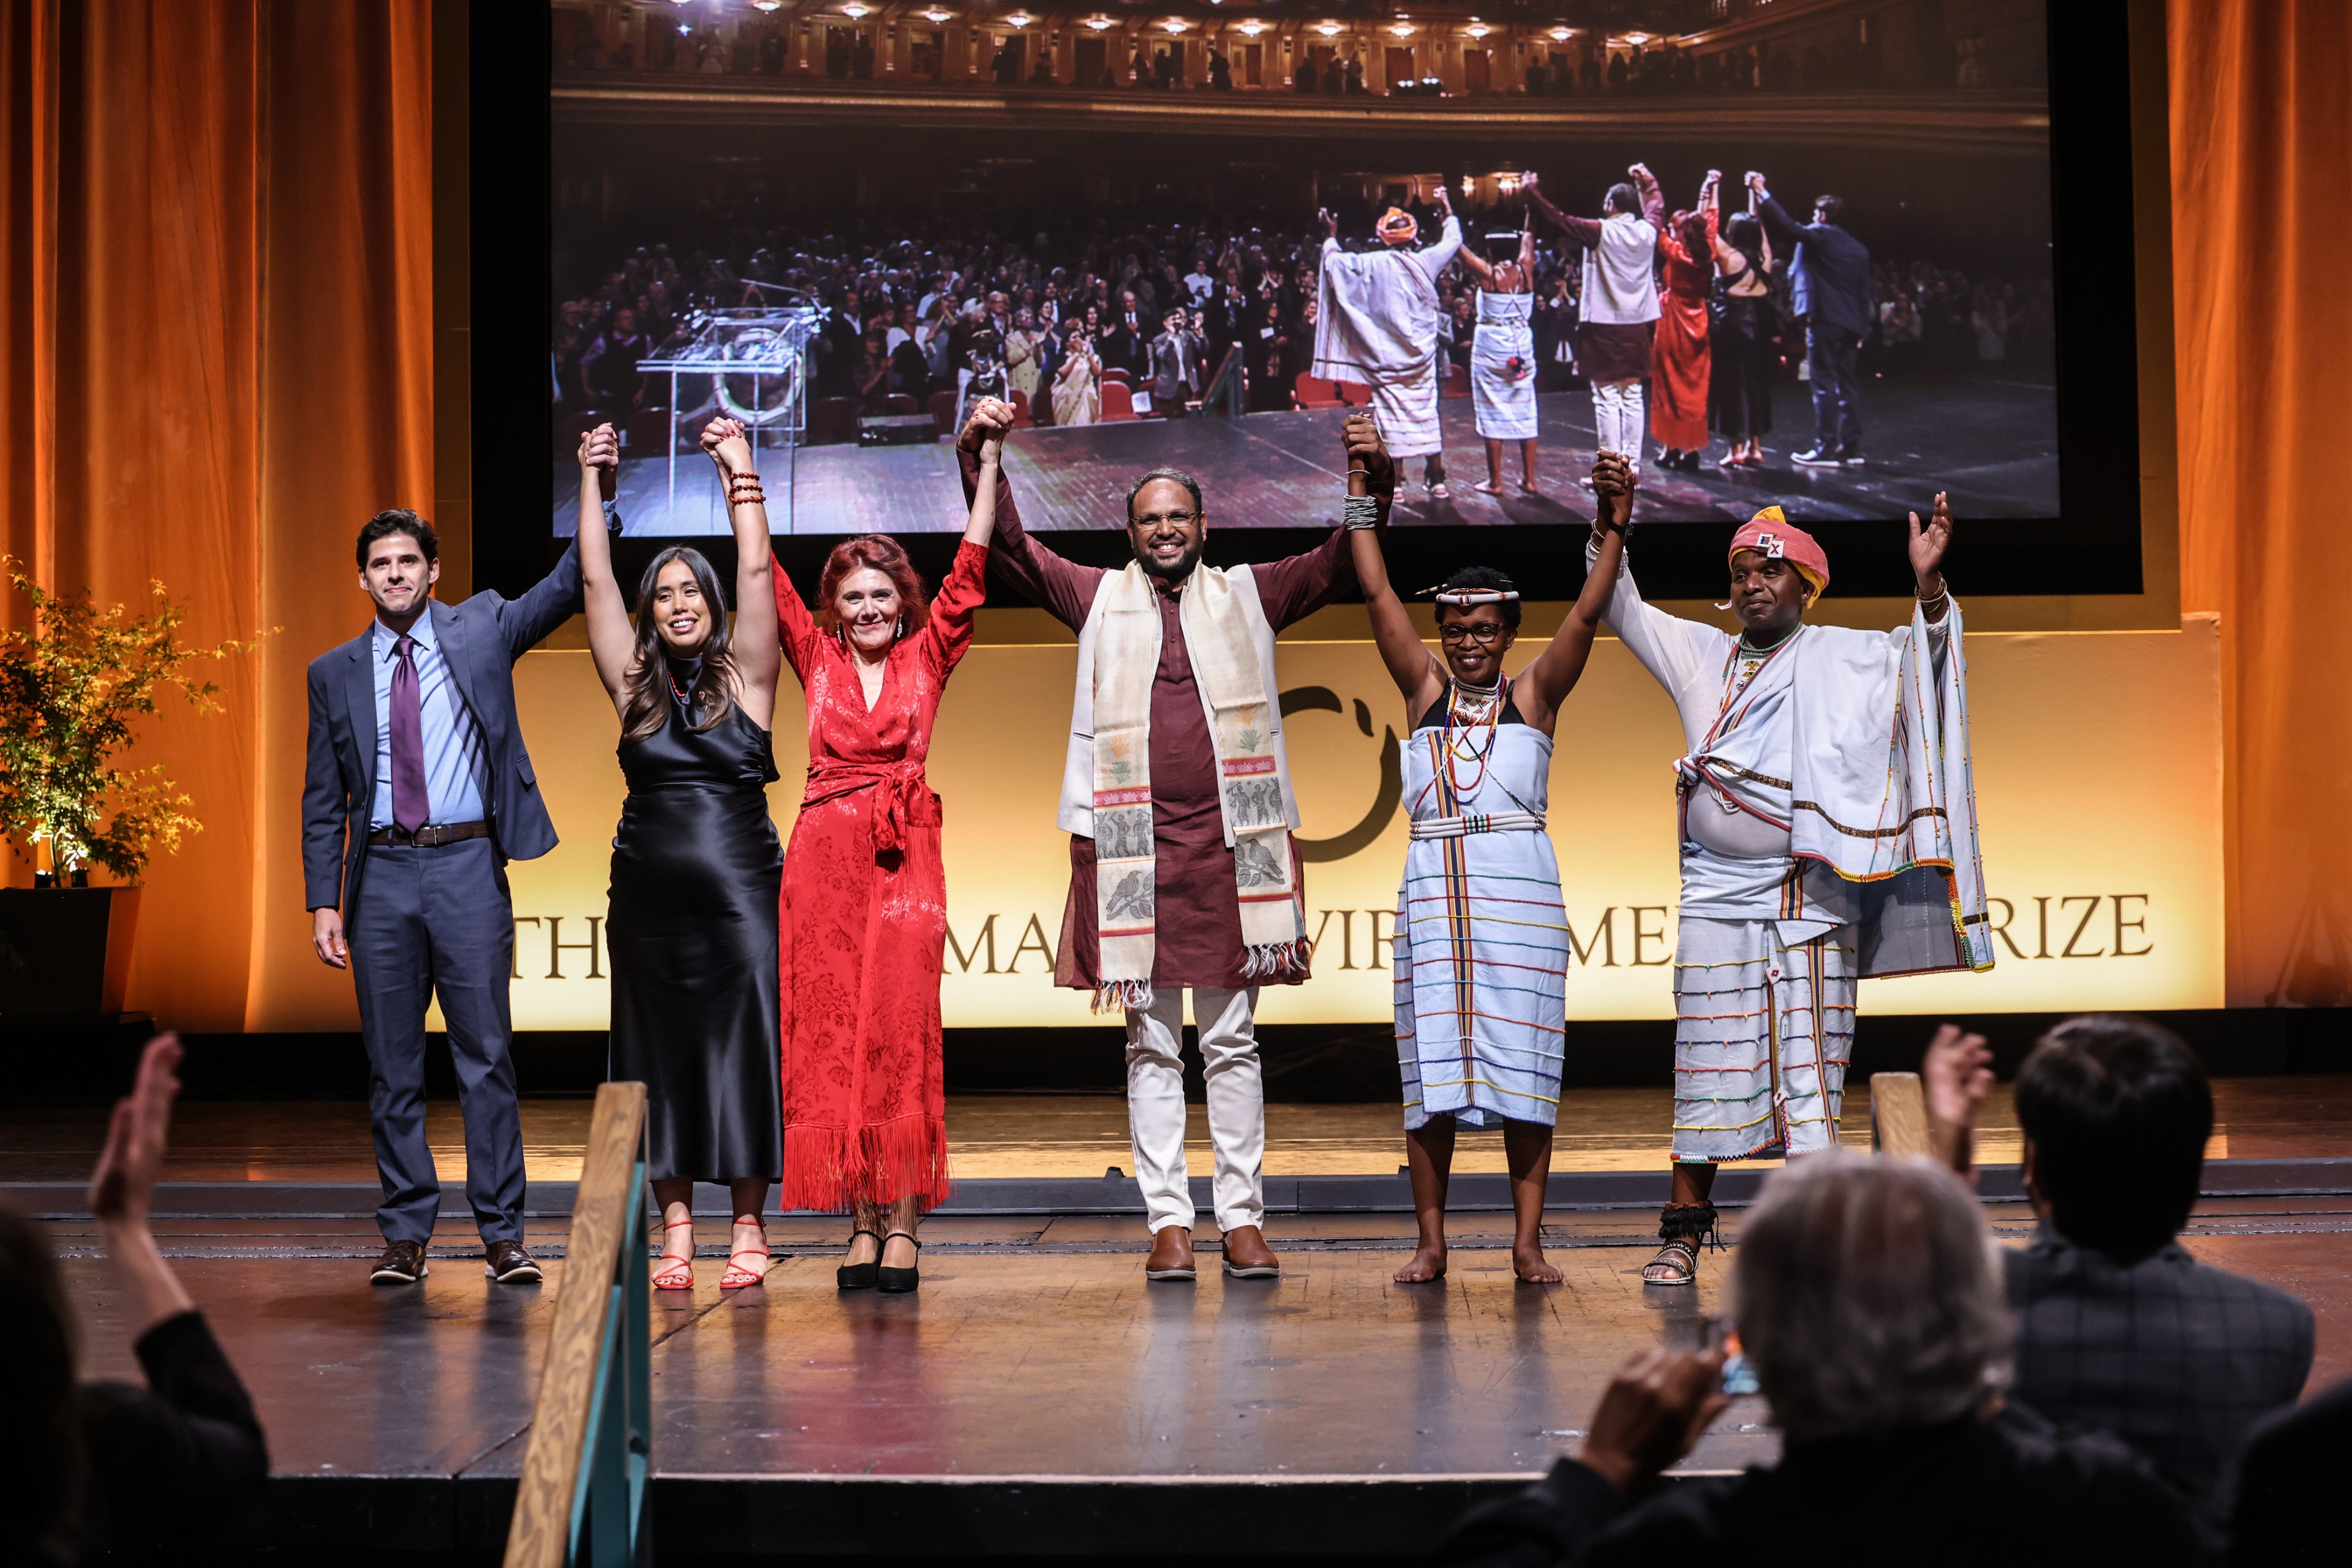 Winners of the 35th annual Goldman Environmental Prize celebrate as a group on stage at the ceremony.